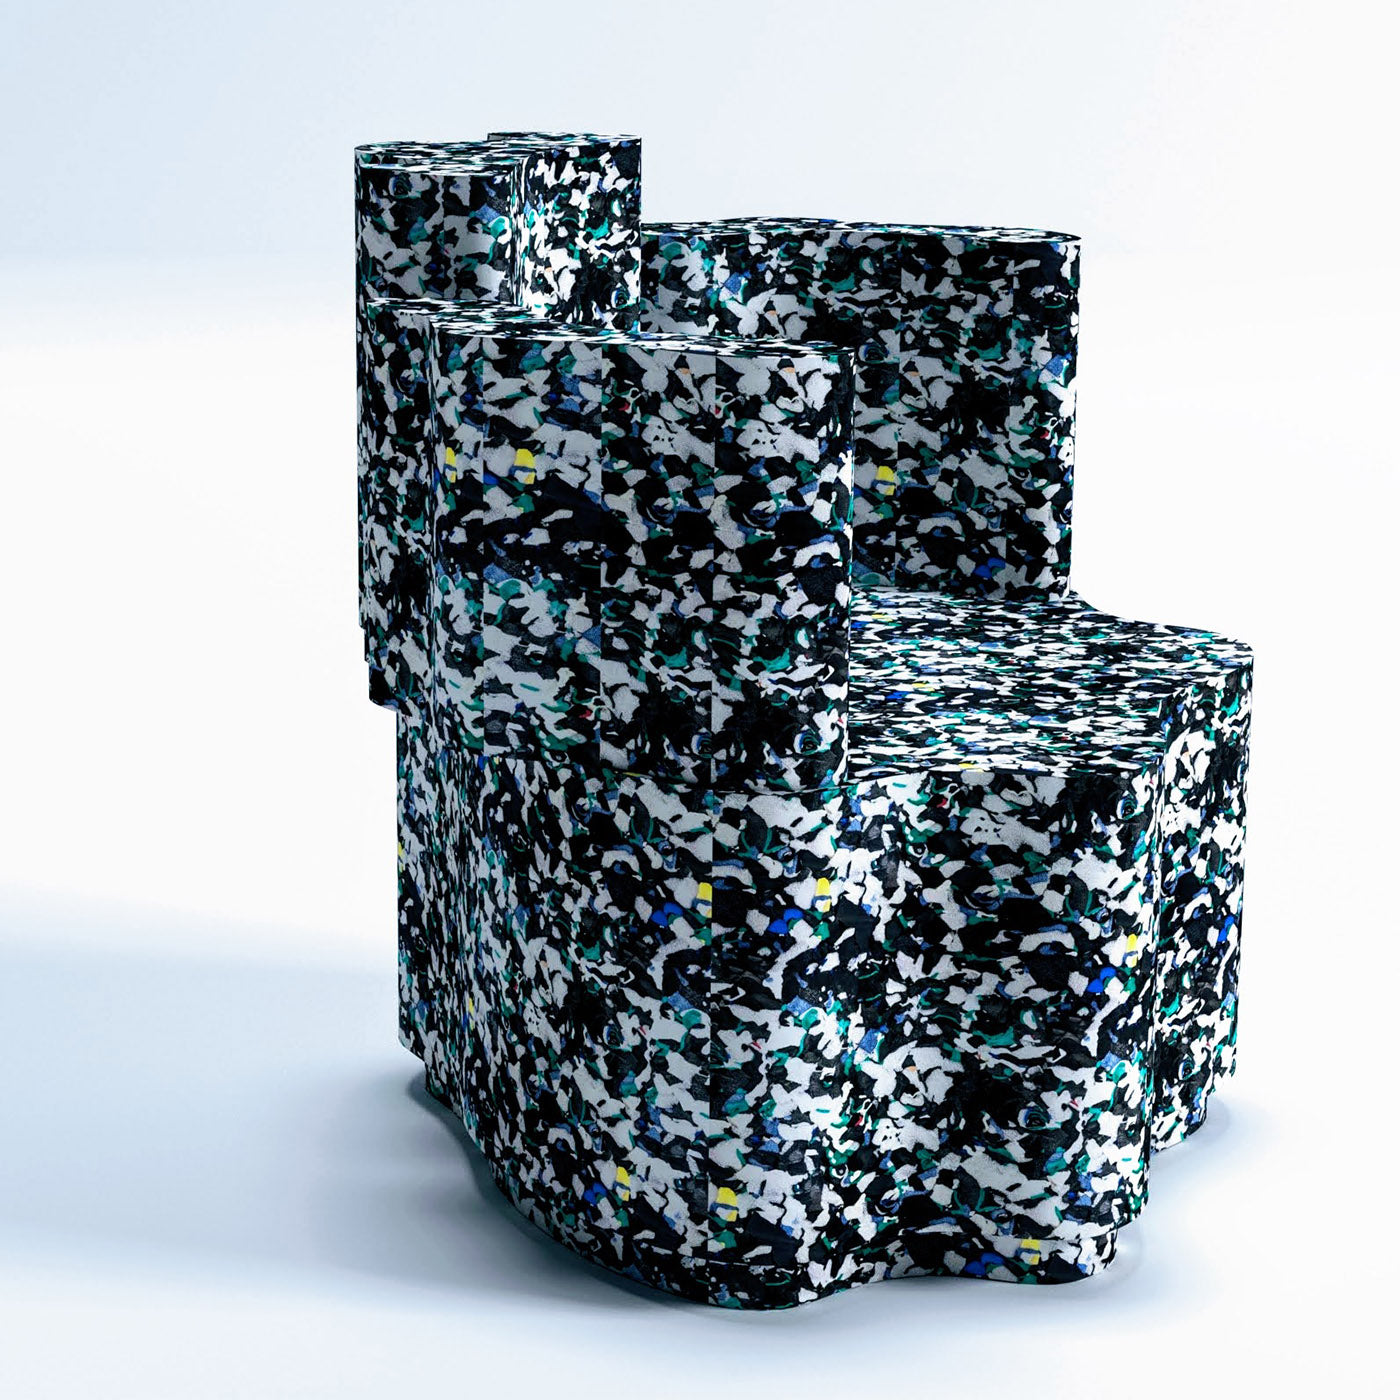 Patatina Recycled Armchair By Clemence Seilles - Alternative view 1